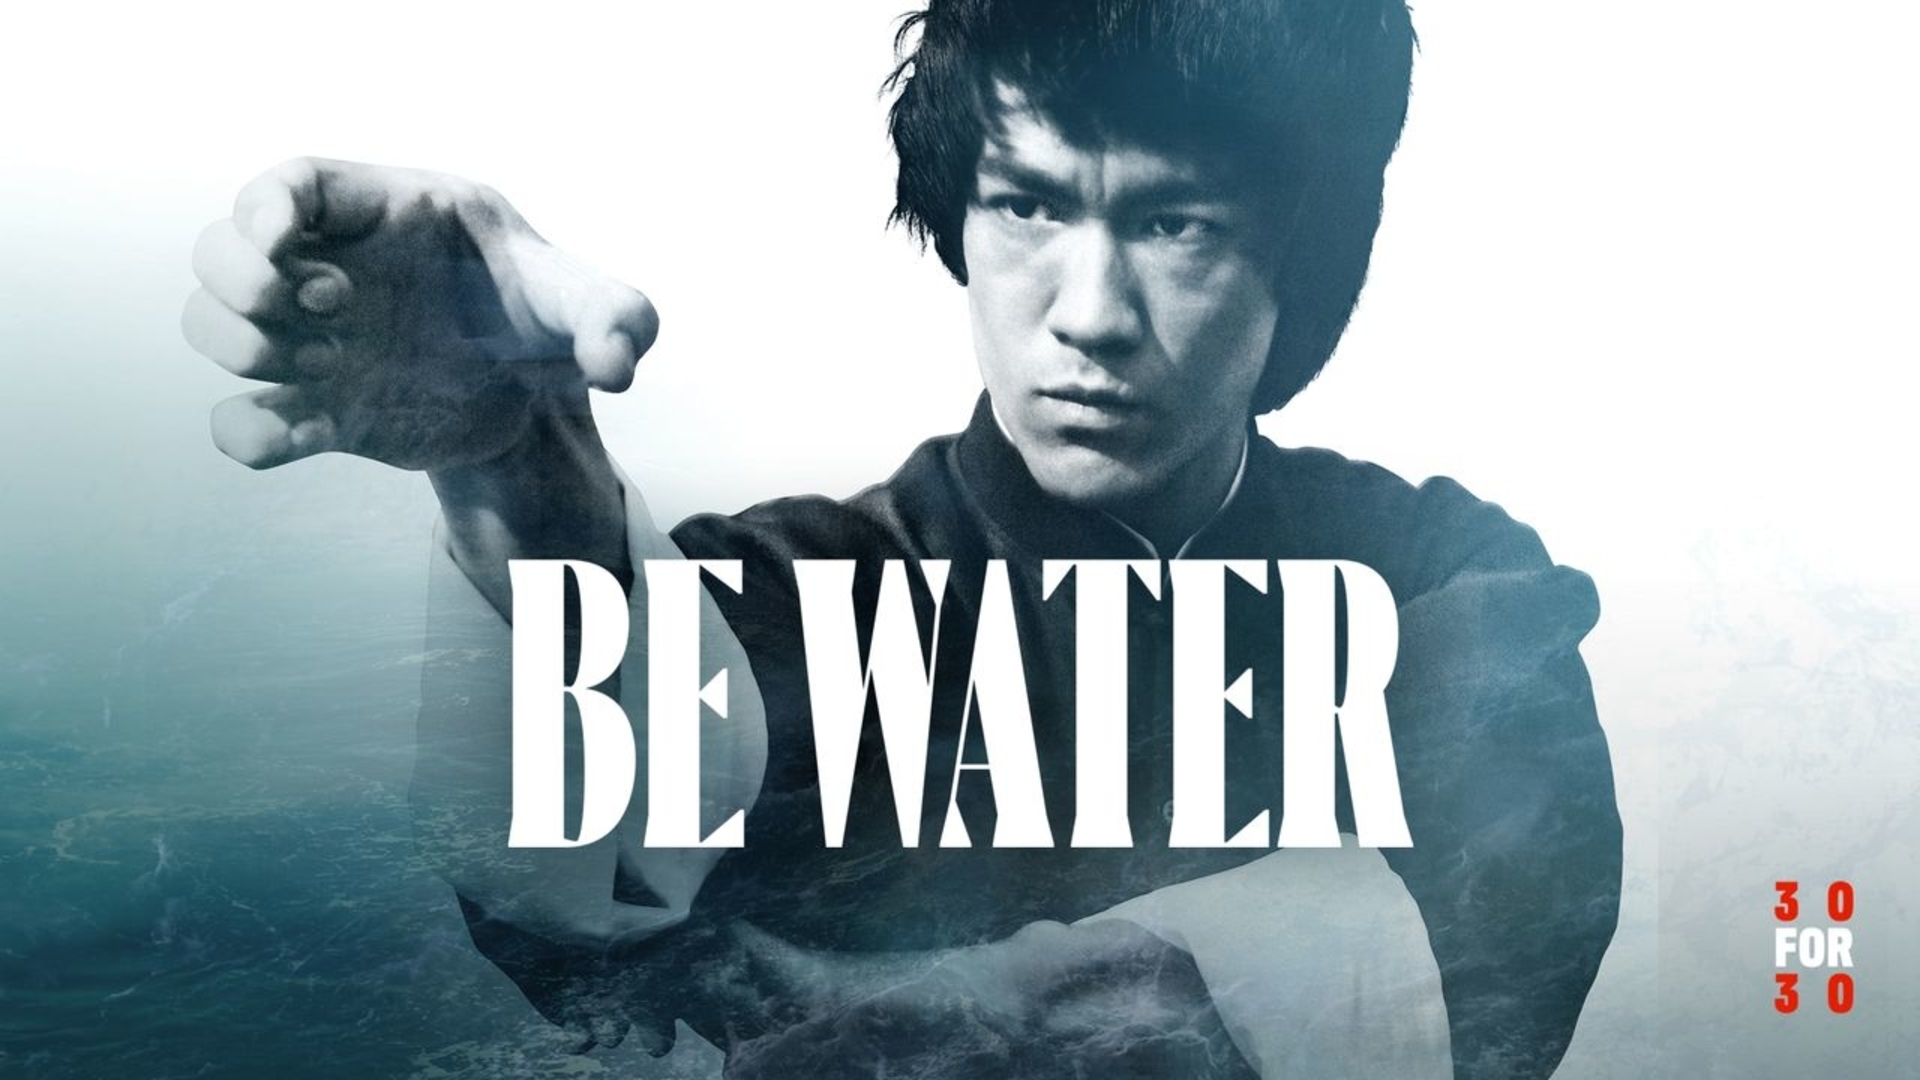 ESPNs Bruce Lee Be Water Doc May Be the Greatest Portrait of